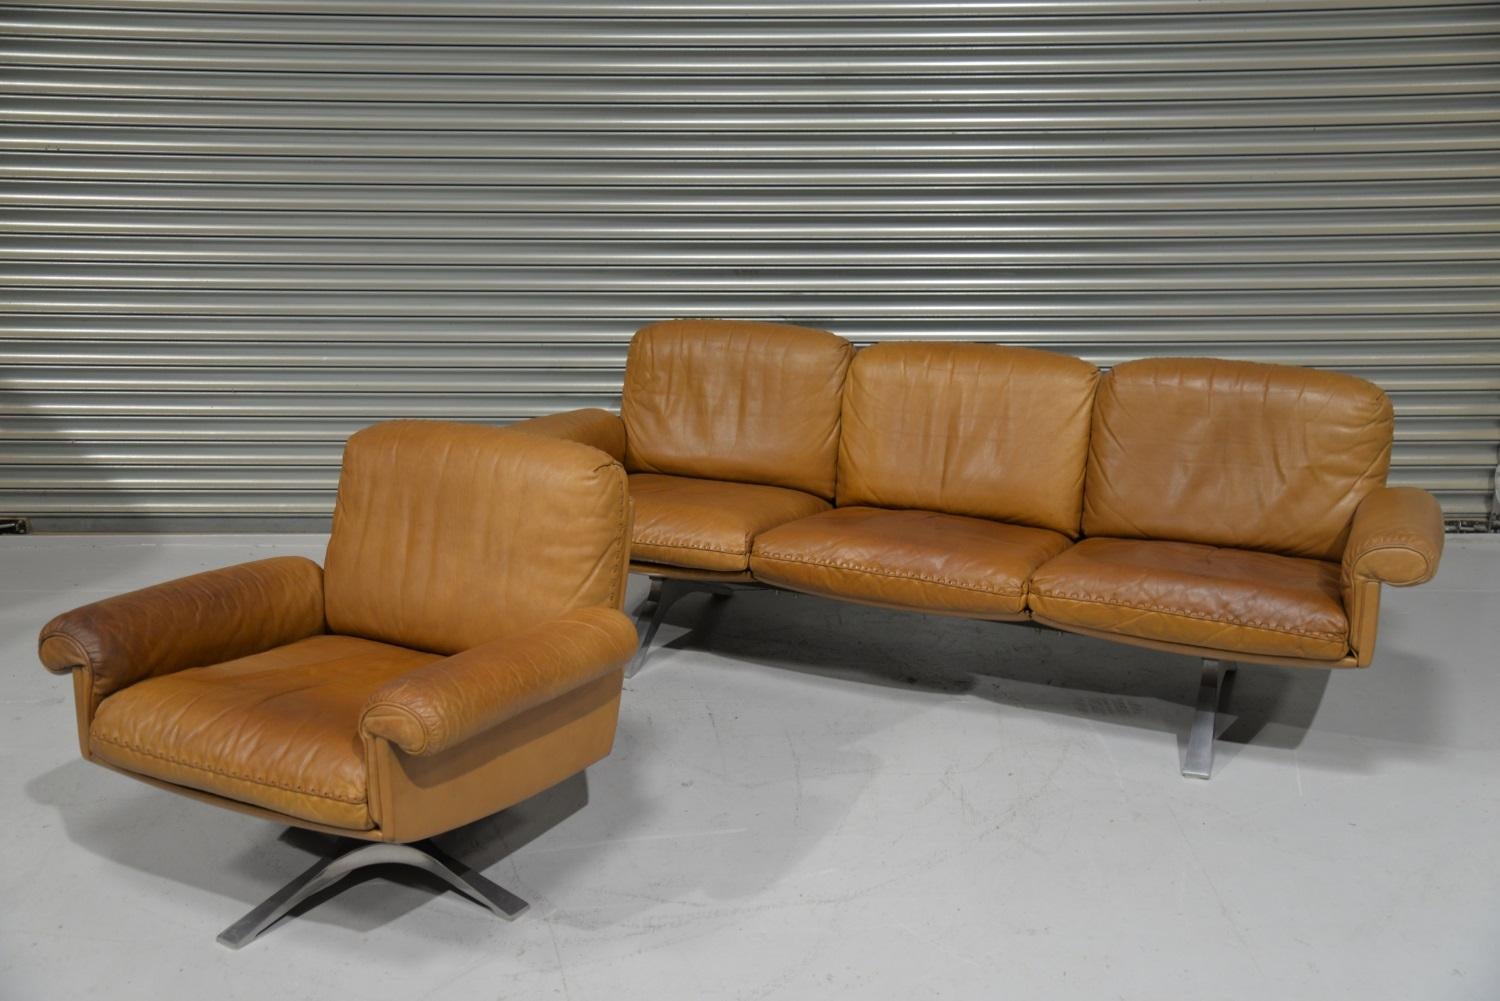 Discounted airfreight for our US and International customers ( from 2 weeks door to door)

A vintage De Sede DS 31 three-seat sofa and matching swivel lounge club armchair. This vintage sofa and matching swivel club armchair were built in the